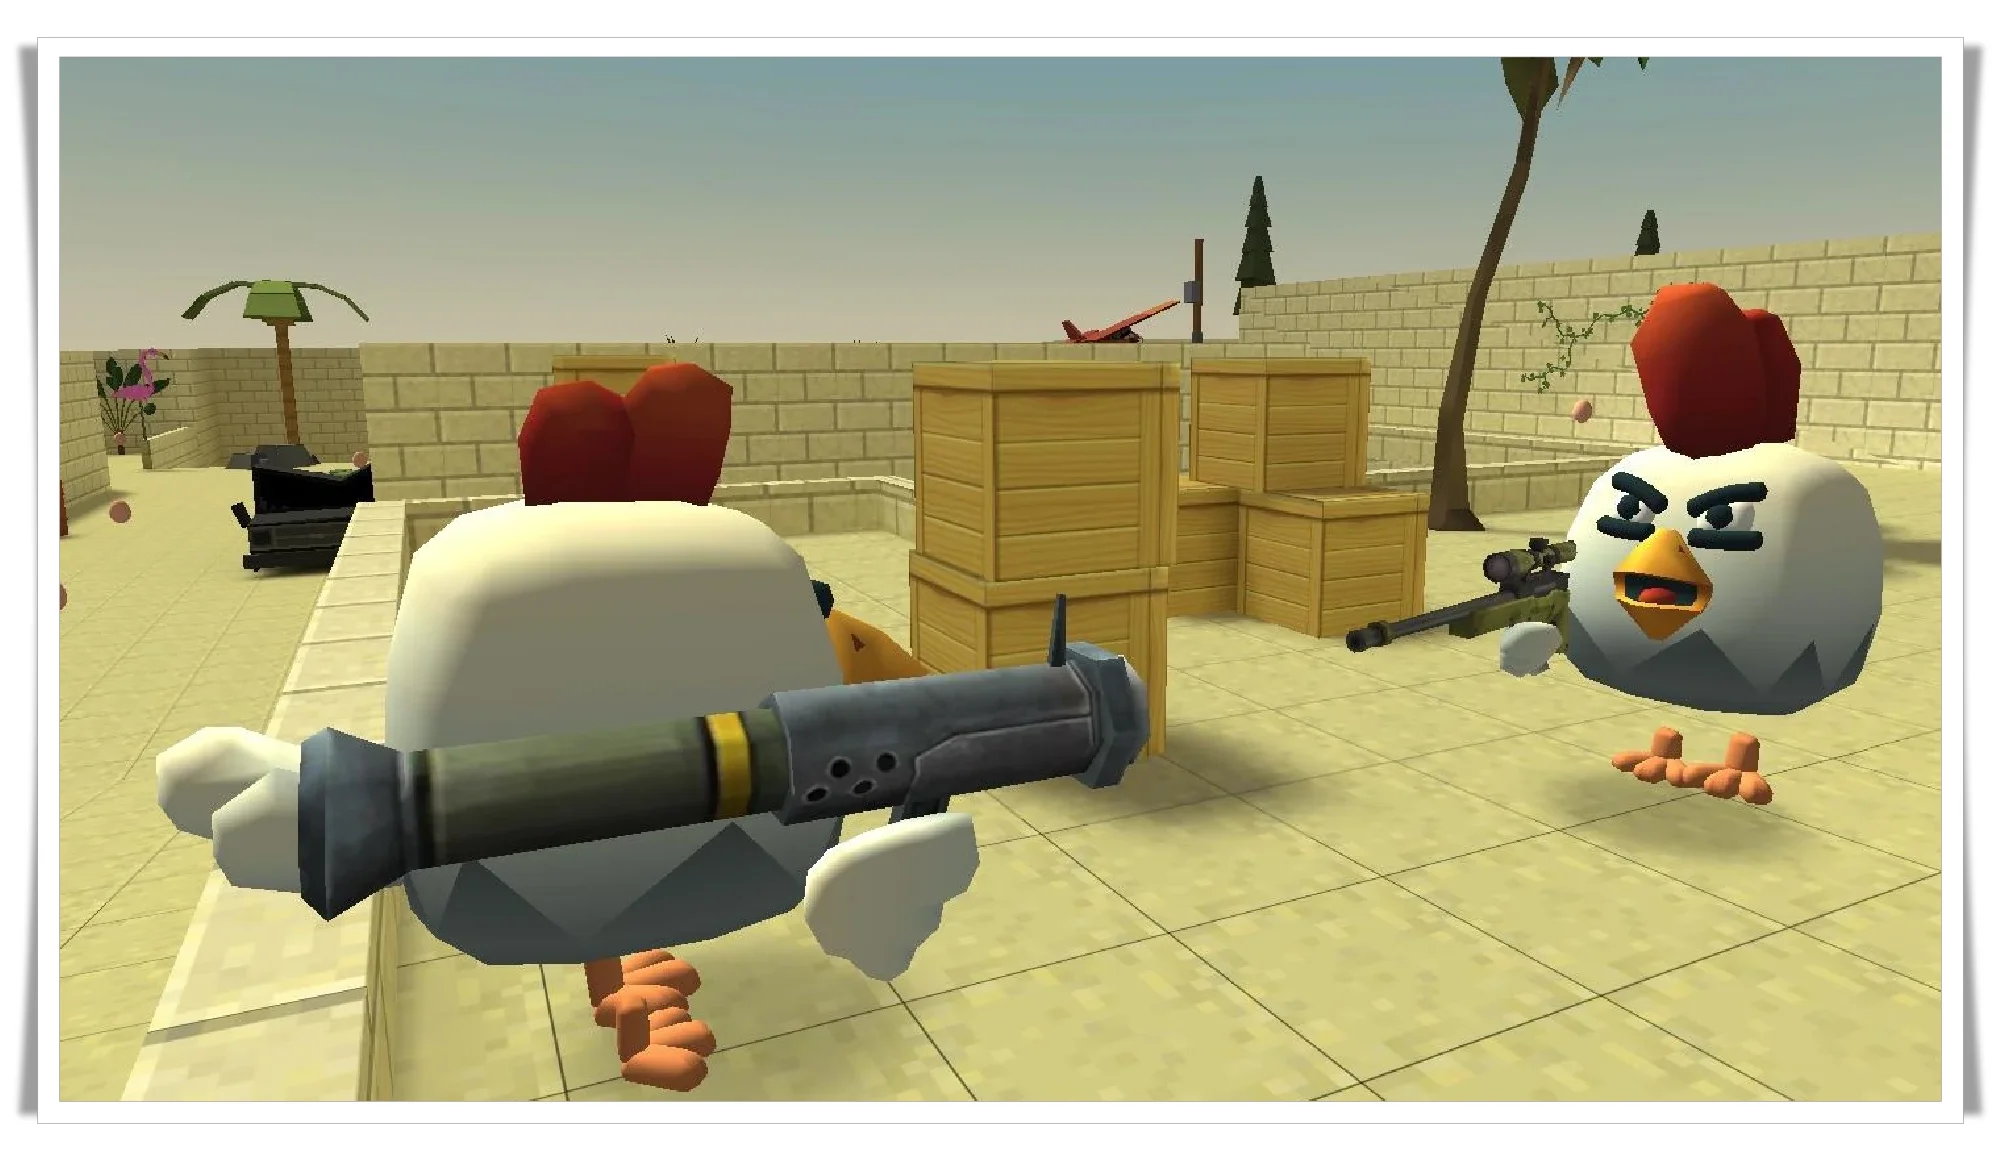 Chicken Gun APK + Mod 3.7.01 - Download Free for Android